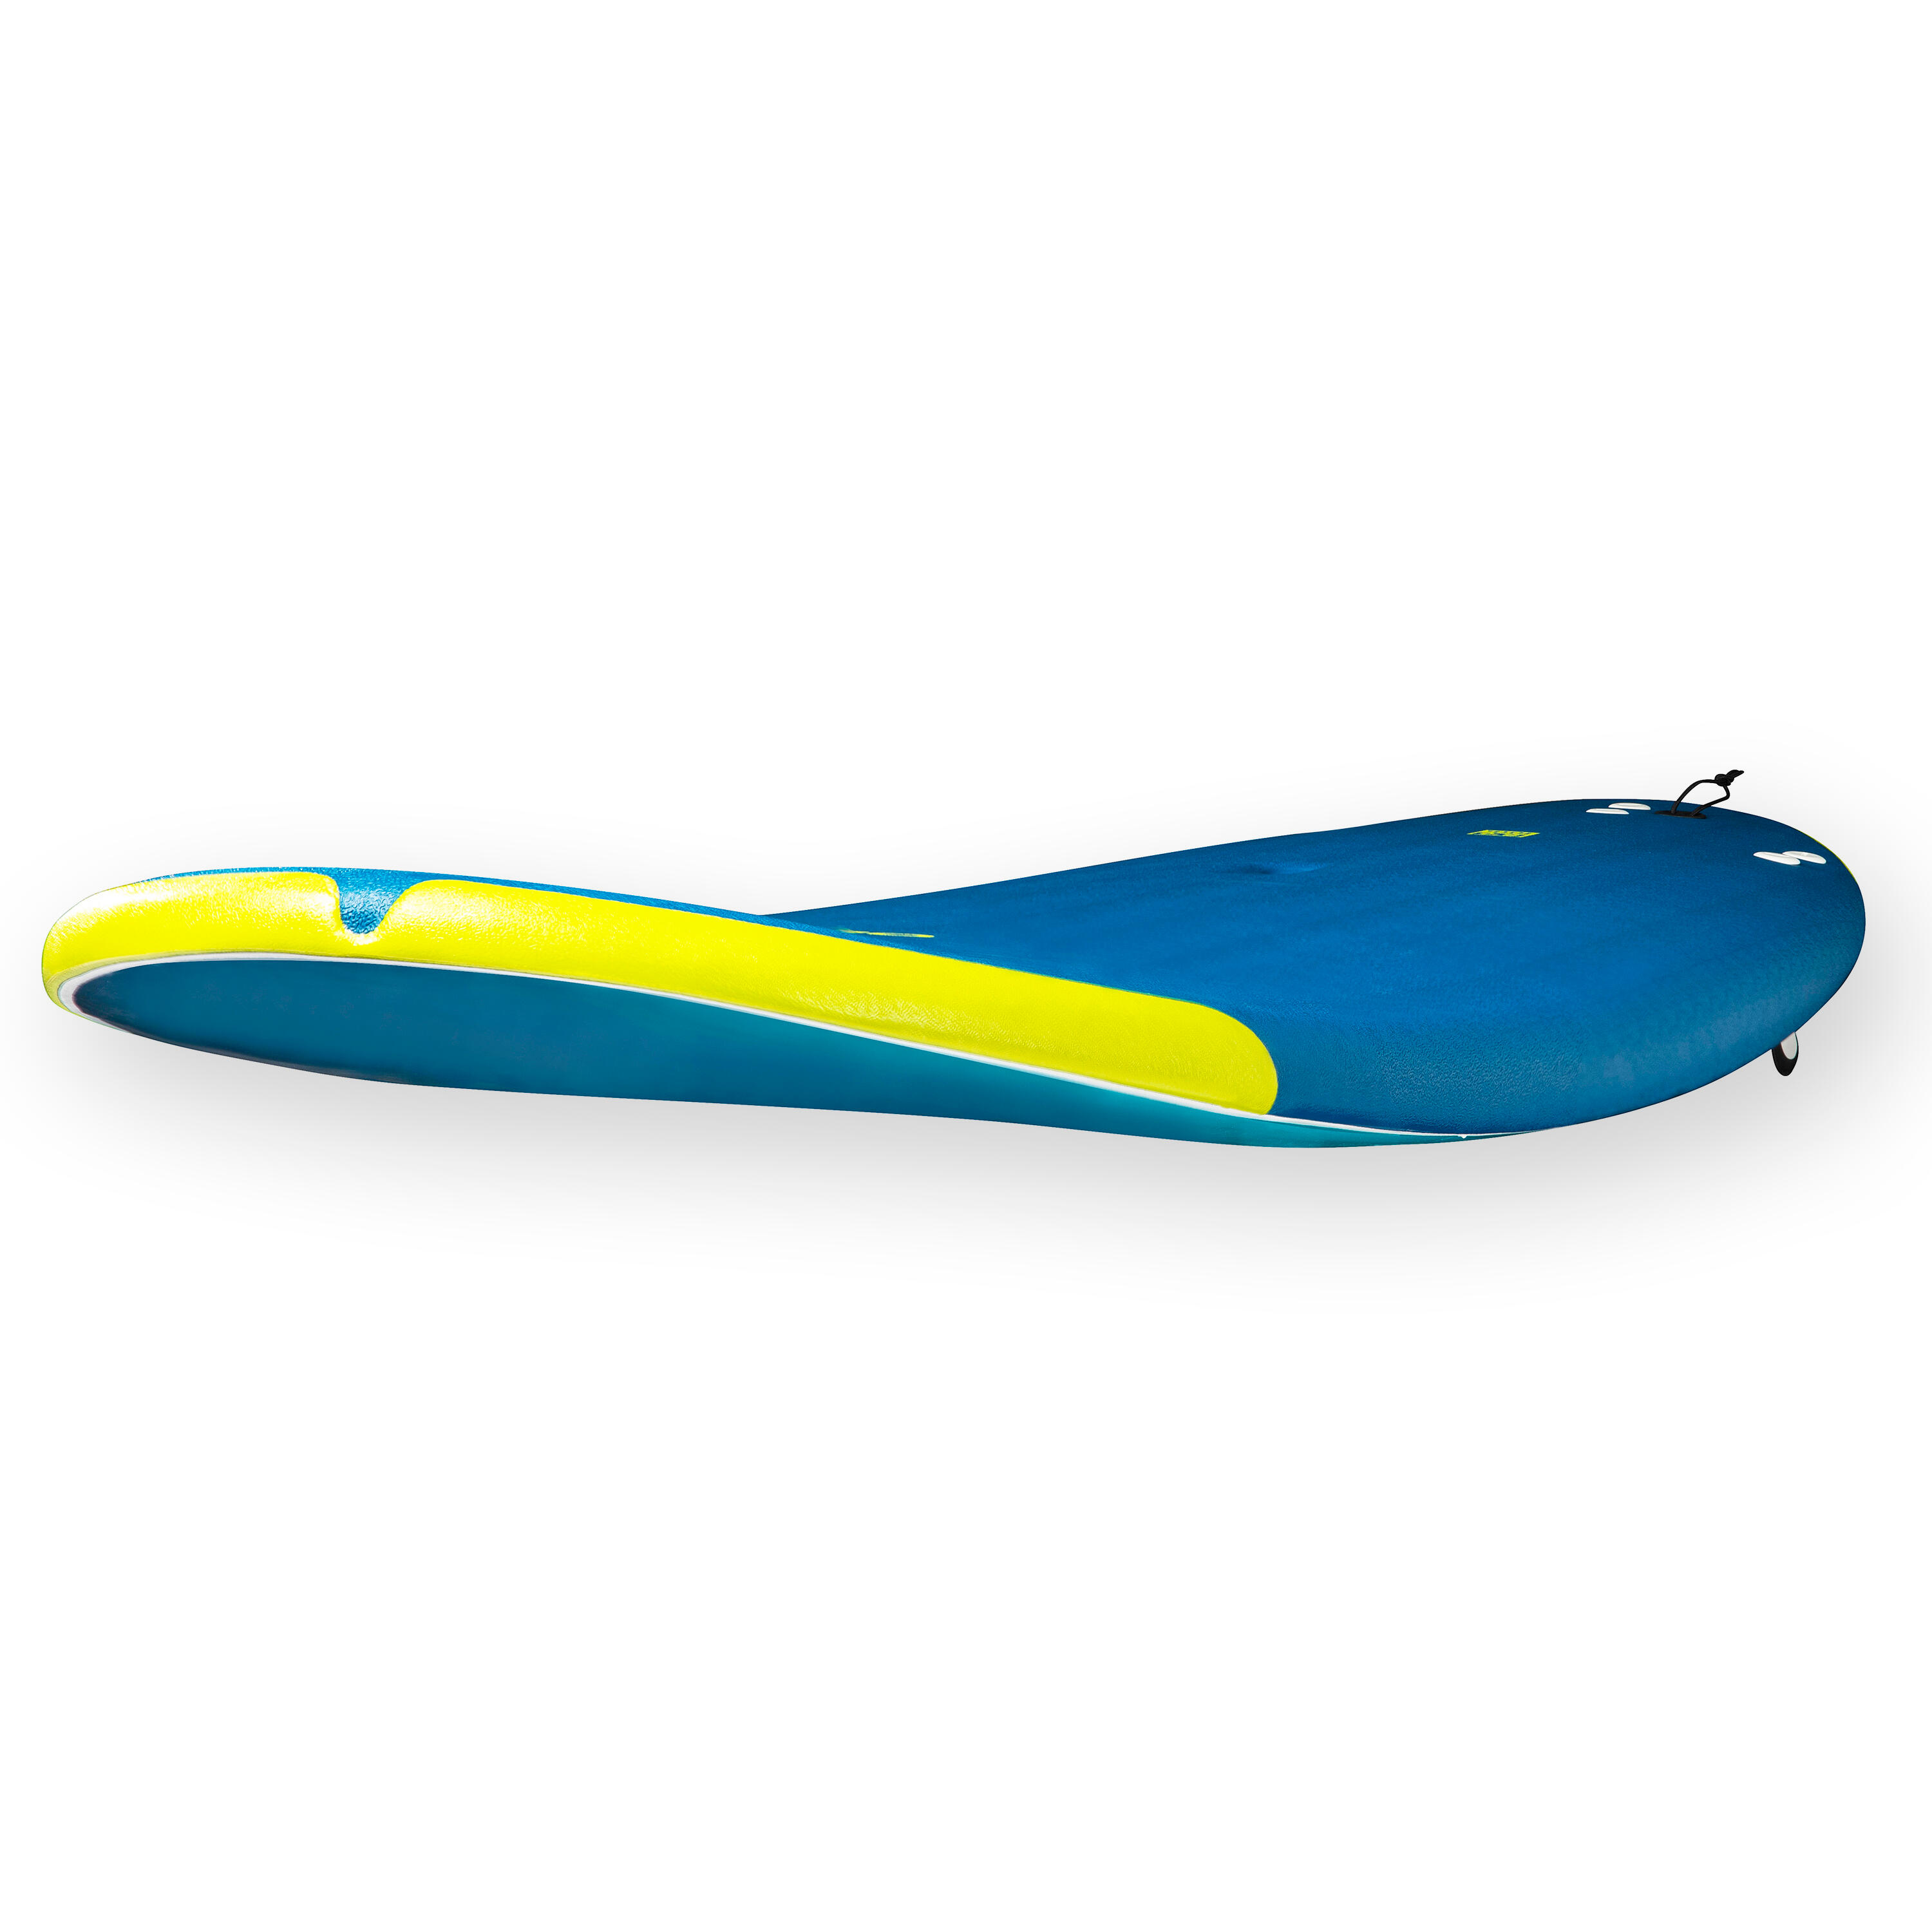 500 Foam Surfboard 8'6”. Supplied with a leash and 3 fins. 12/13